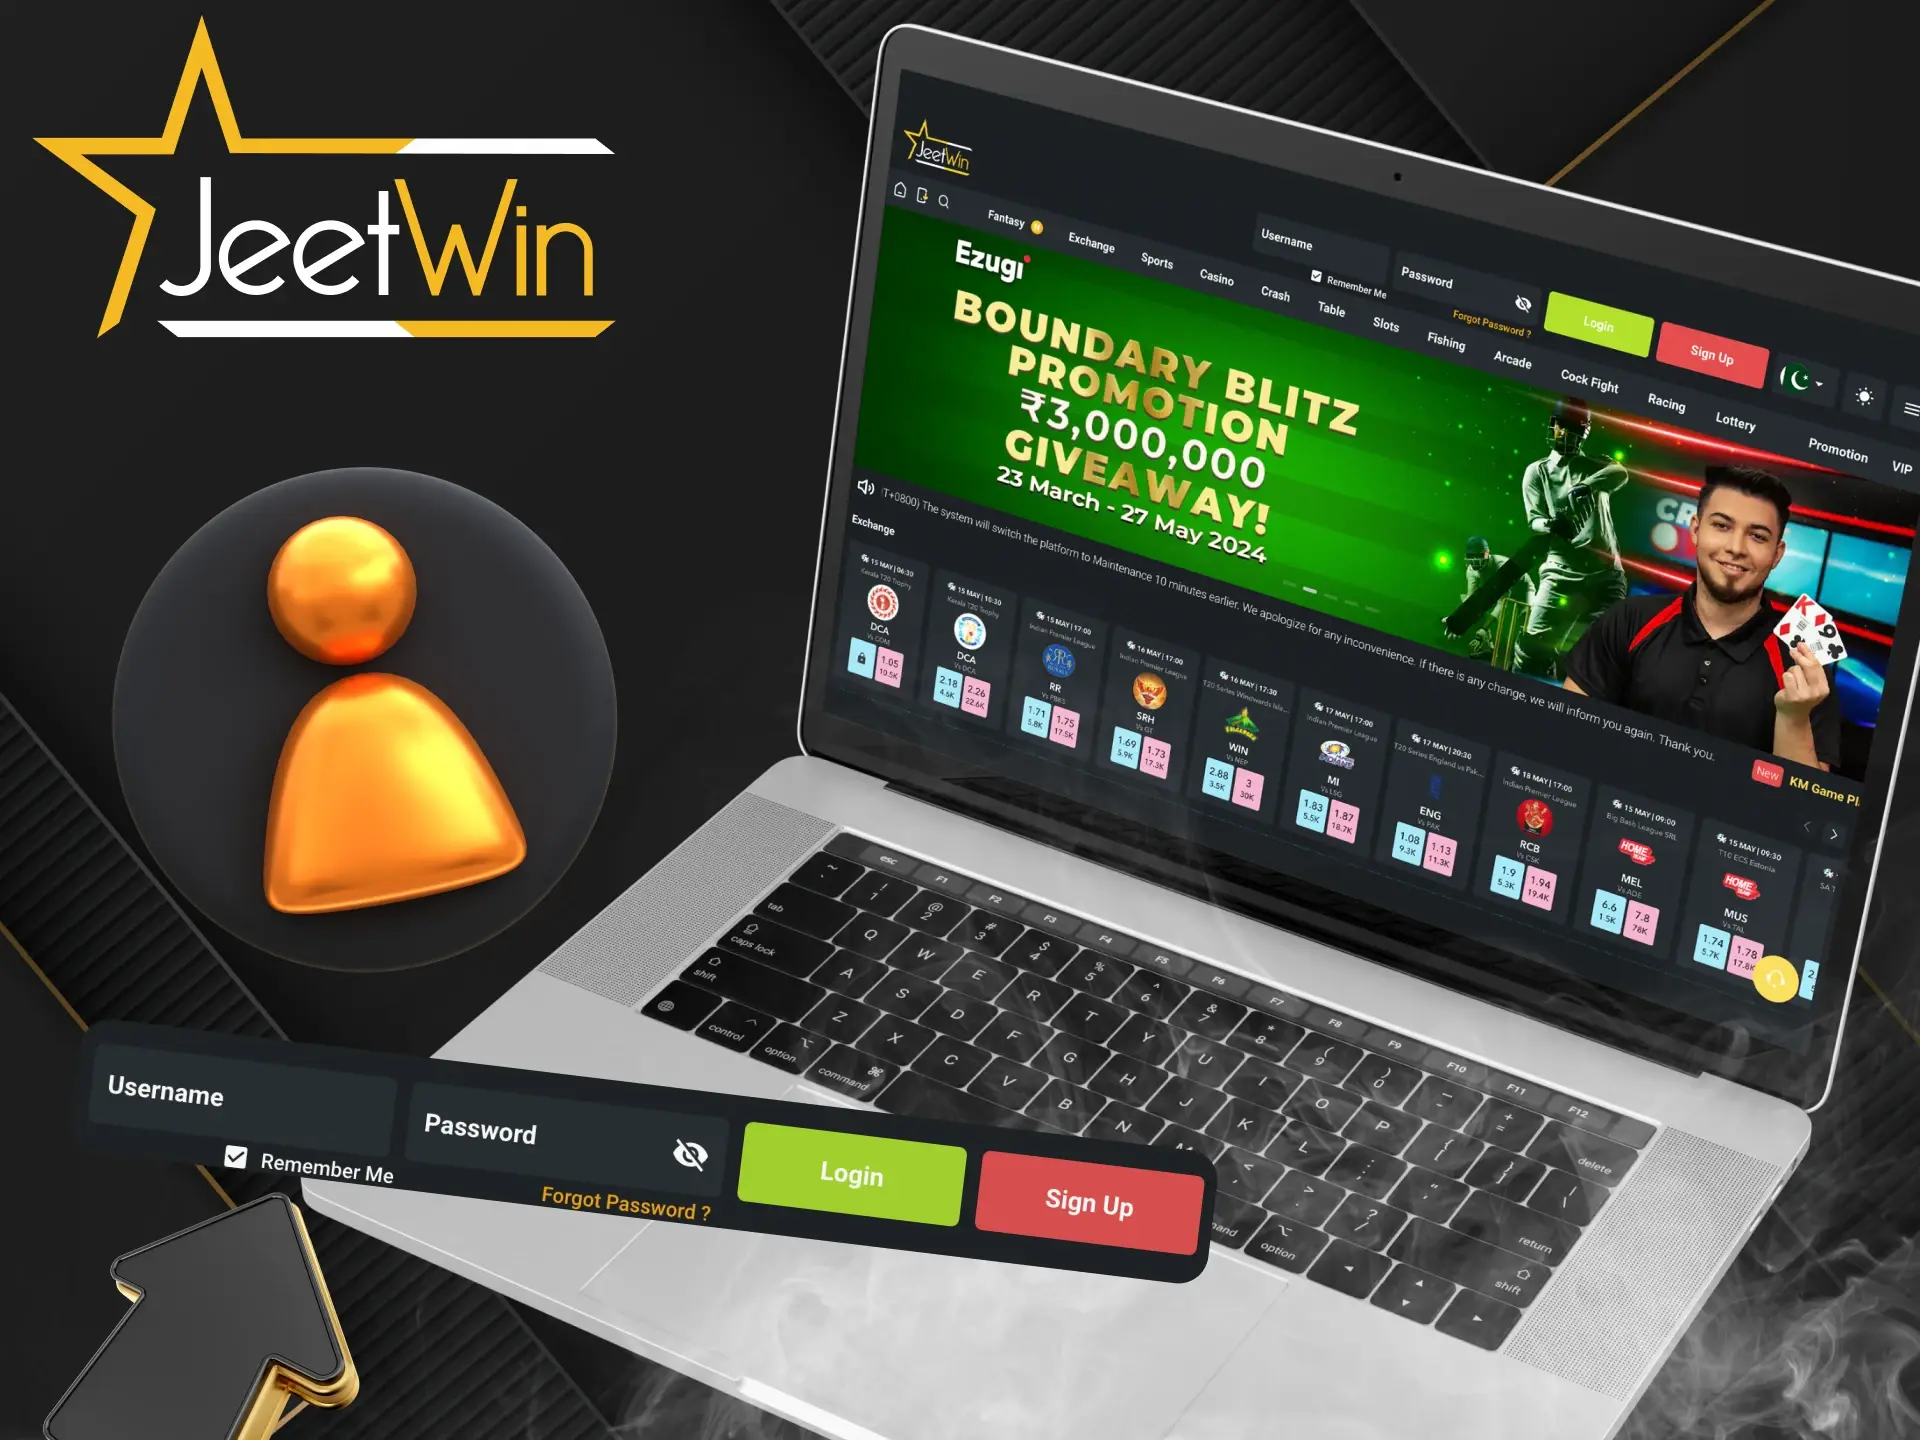 Instructions for players on how to log in to the JeetWin online casino website.